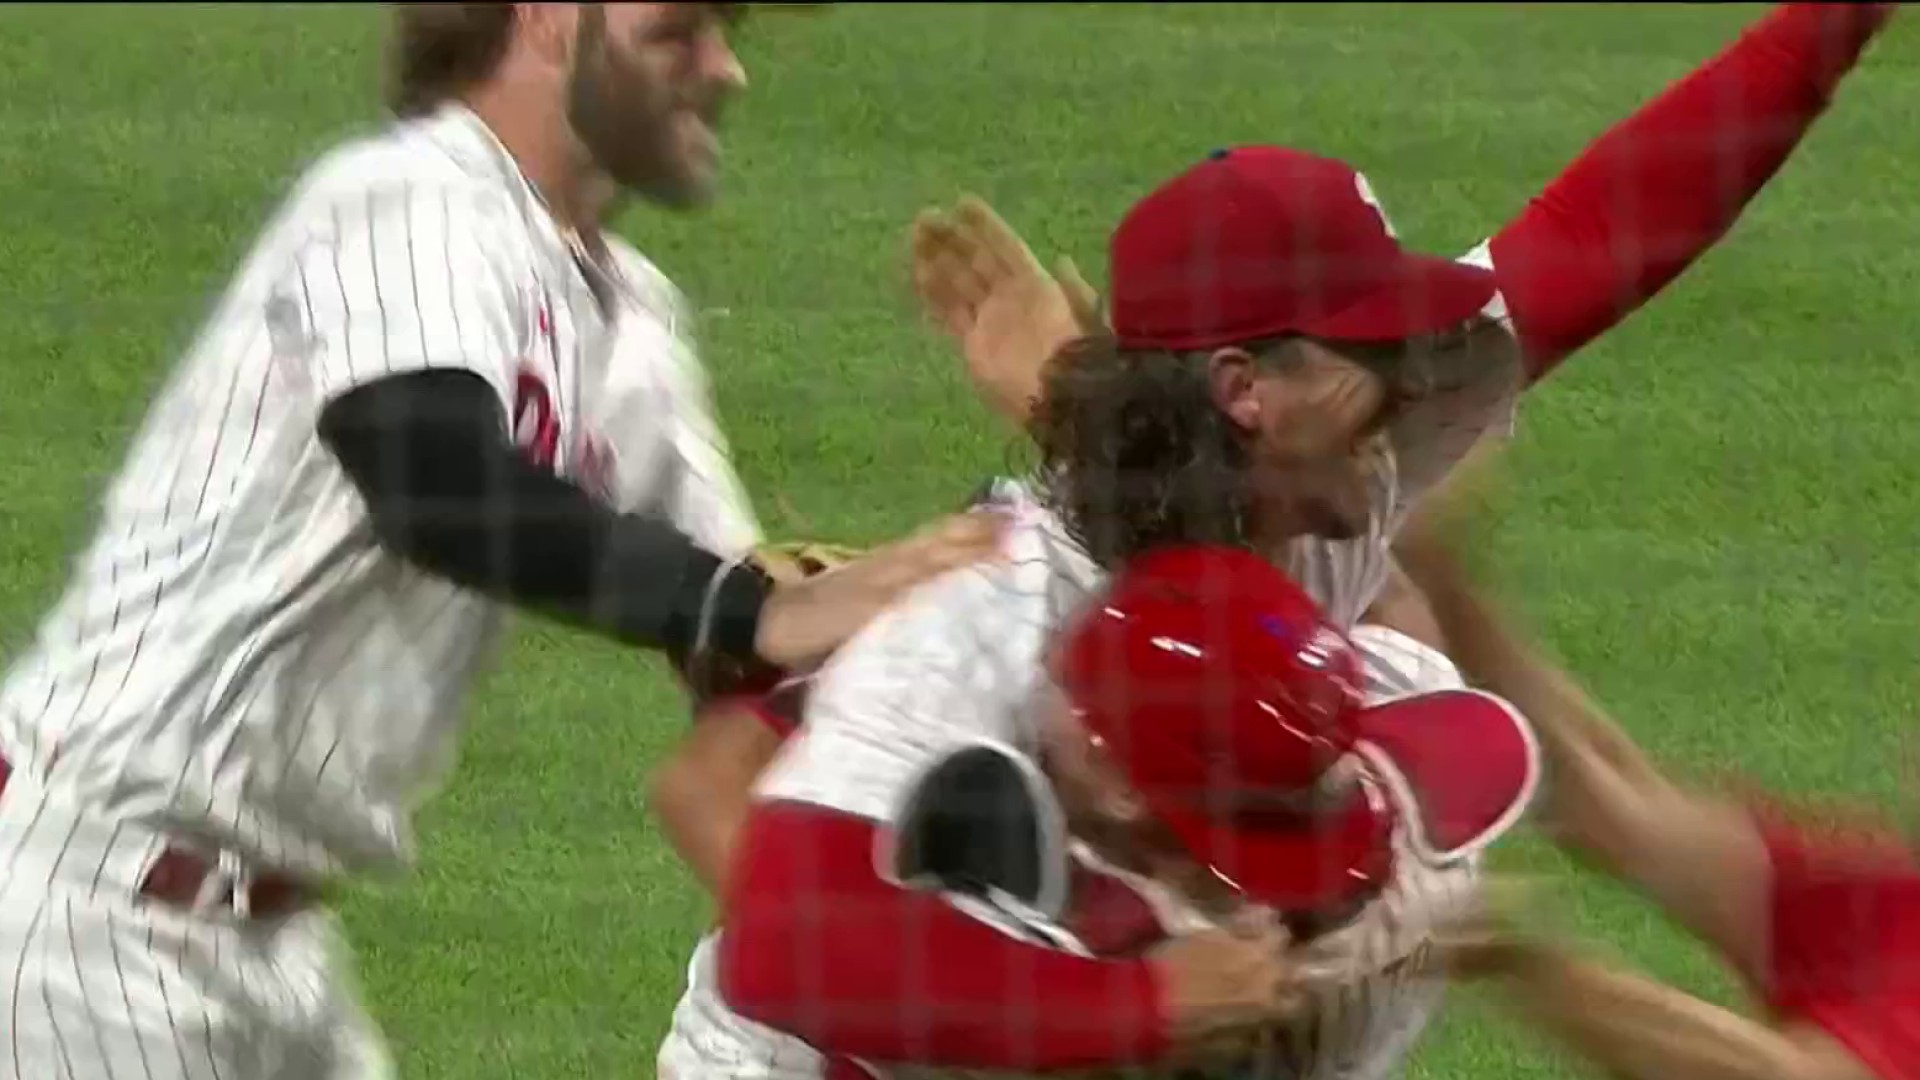 Michael Lorenzen throws a no-hitter in his home debut with the Phillies,  14th in franchise history